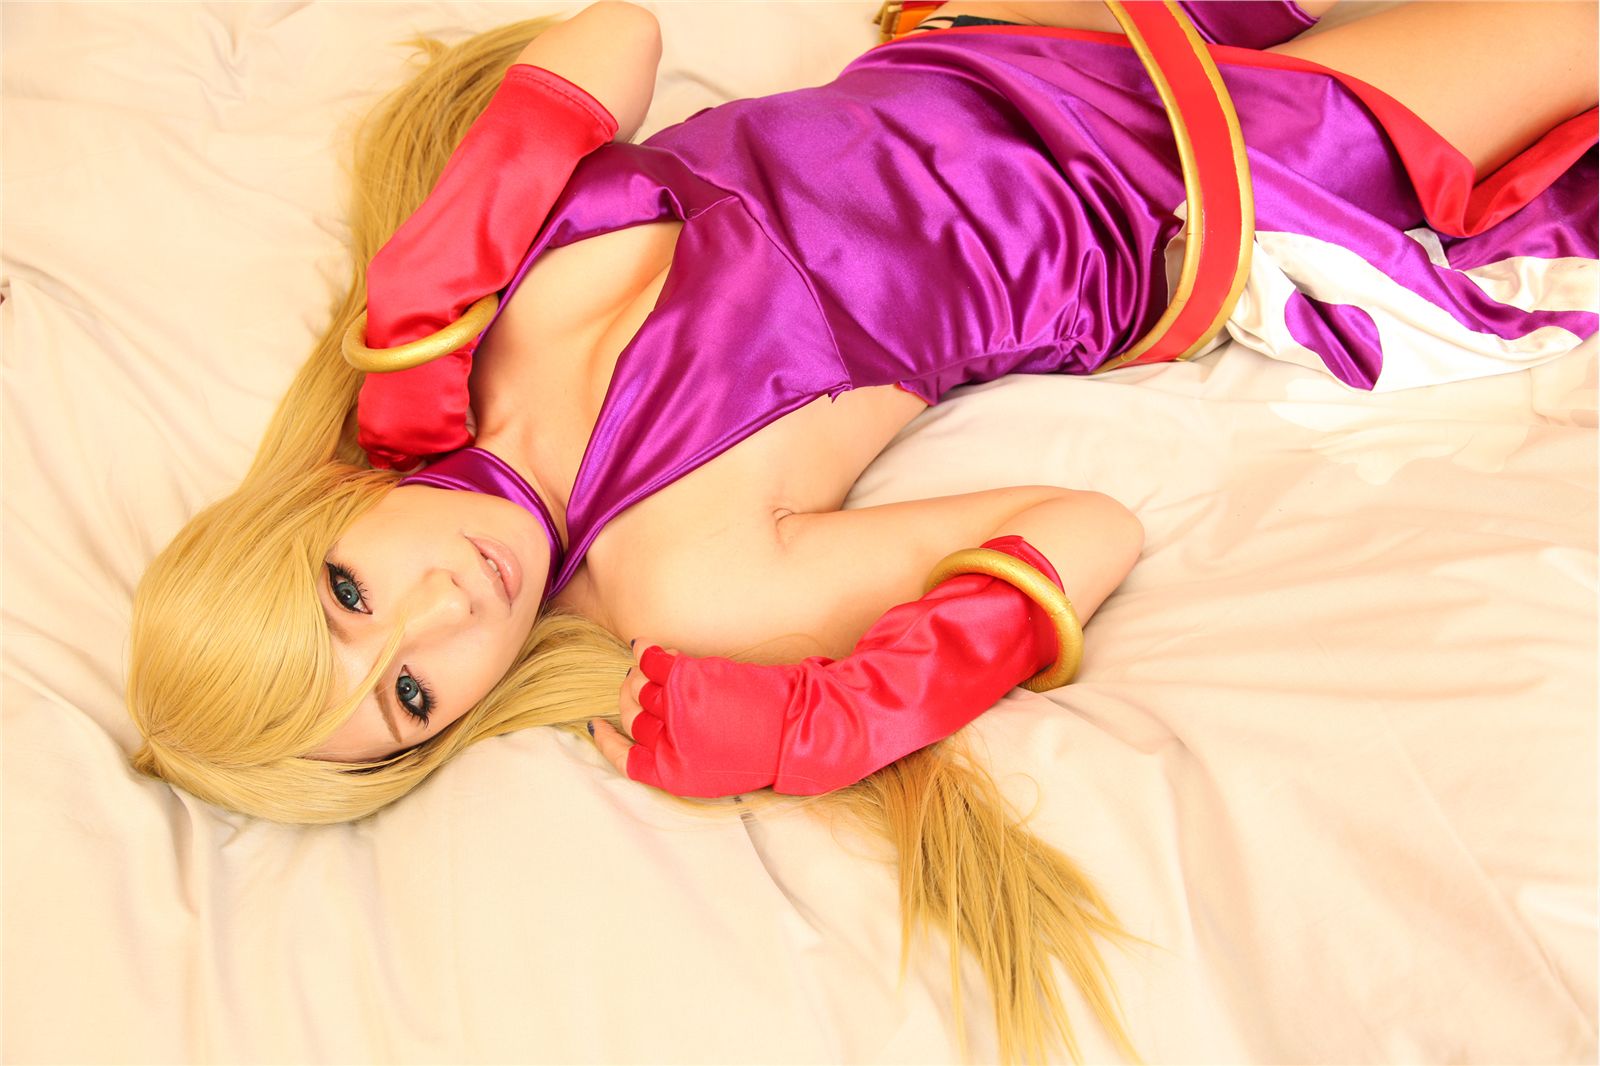 [Cosplay] purple sexy beauty picture cos(56)